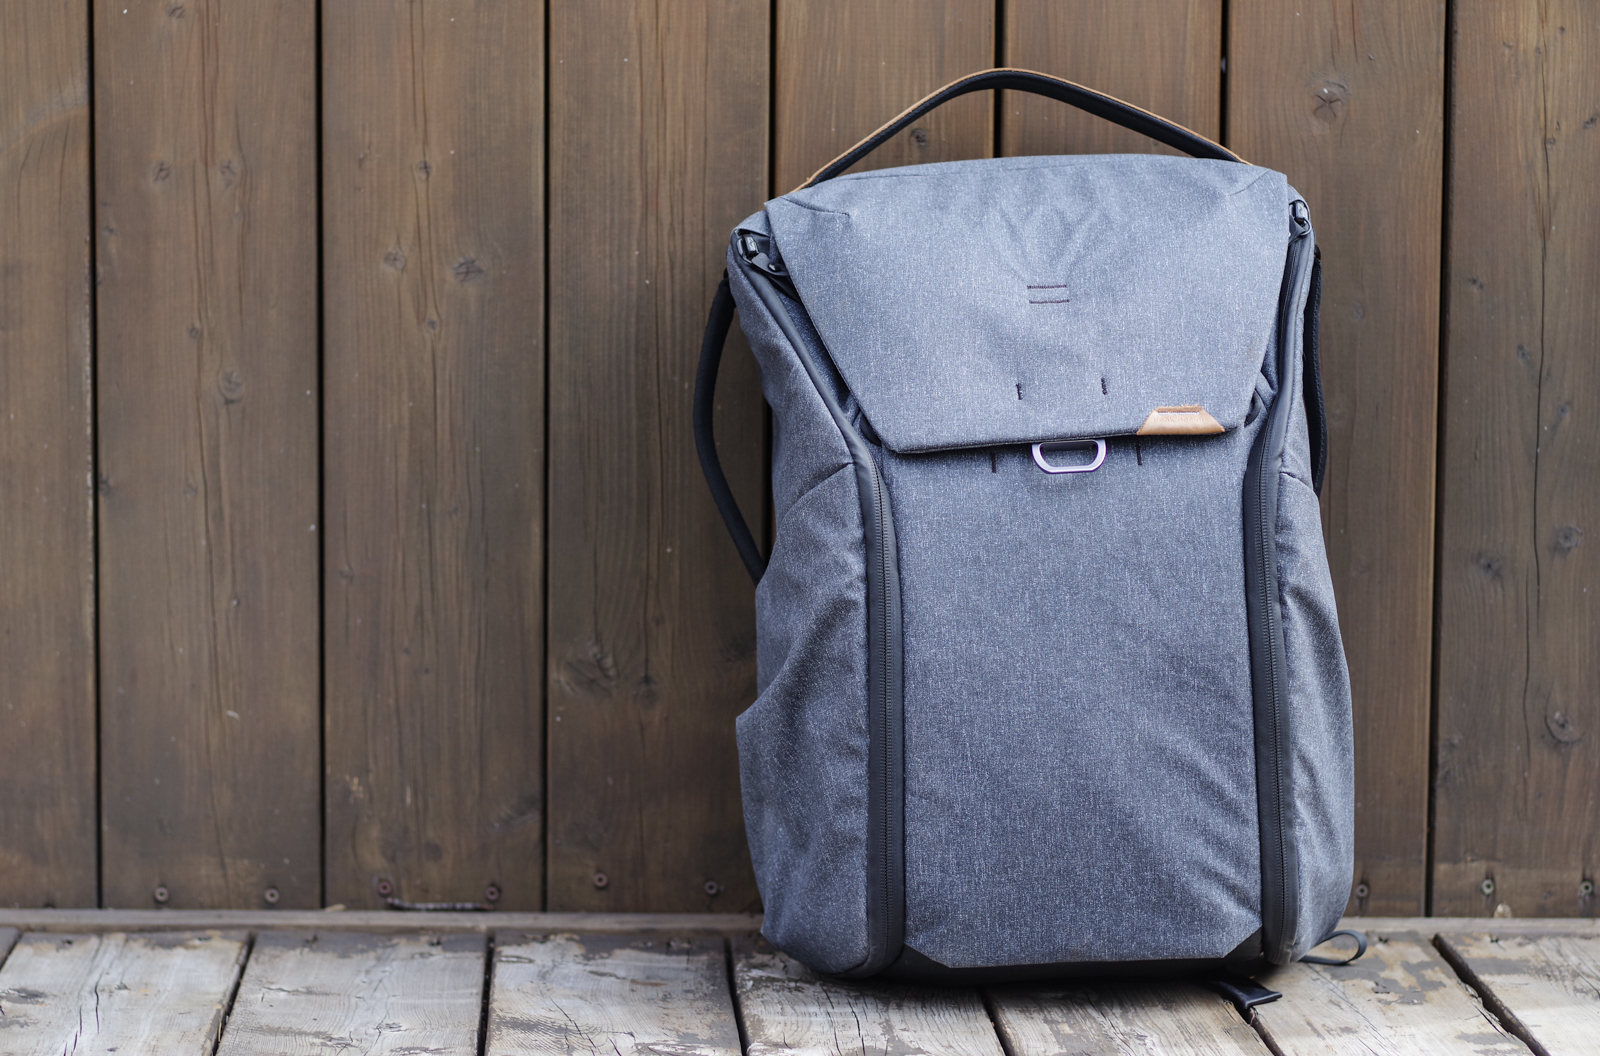 House Labor Arise Peak Design Everyday Backpack V2 30L: A Long-Term Review - Light And Matter